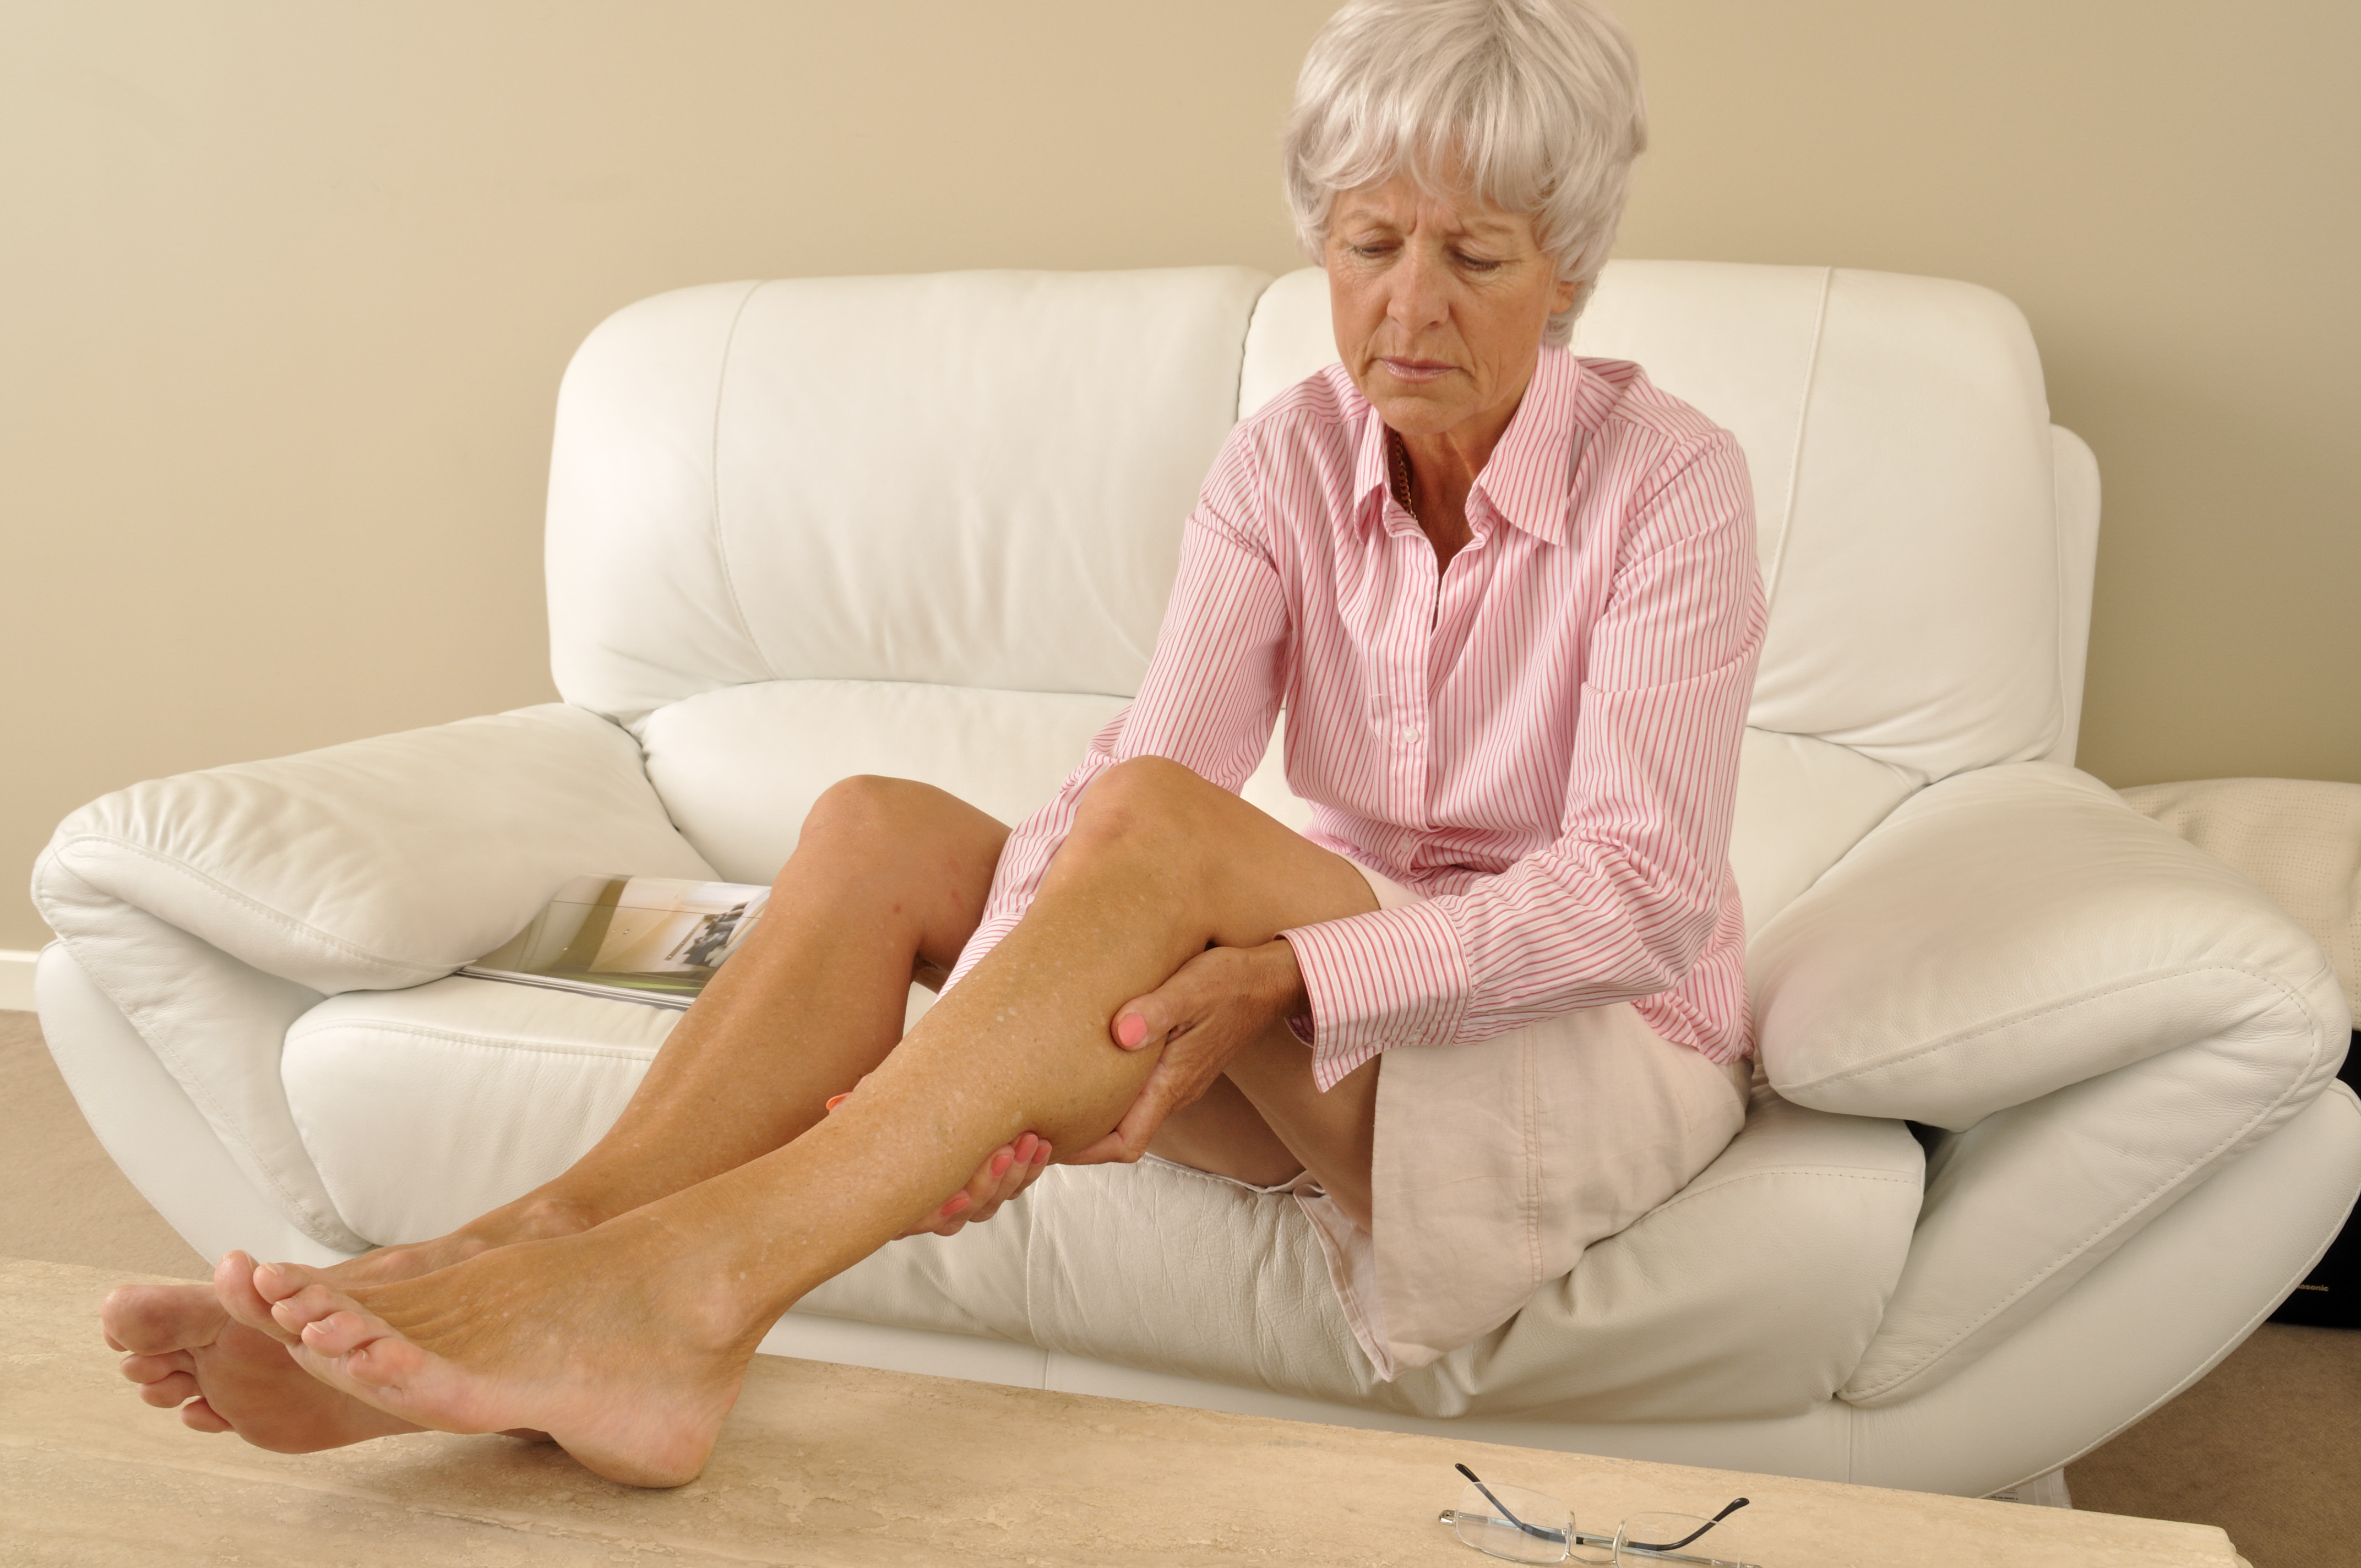 What serious health concerns do varicose veins pose?